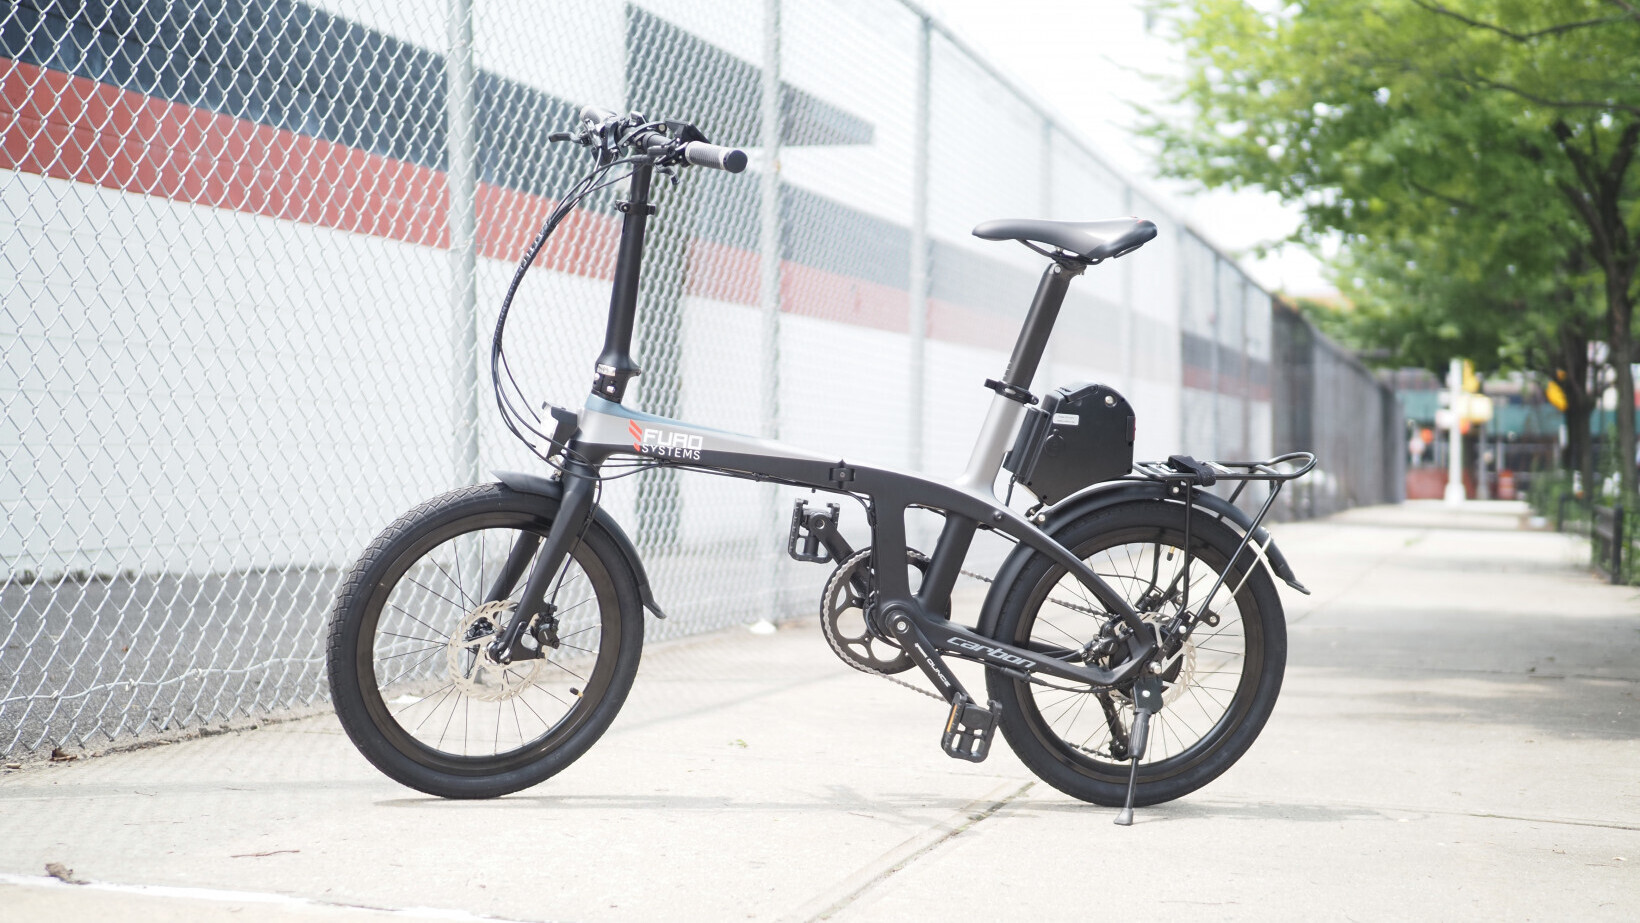 Furo X review: A carbon fiber folding ebike for weight weenies